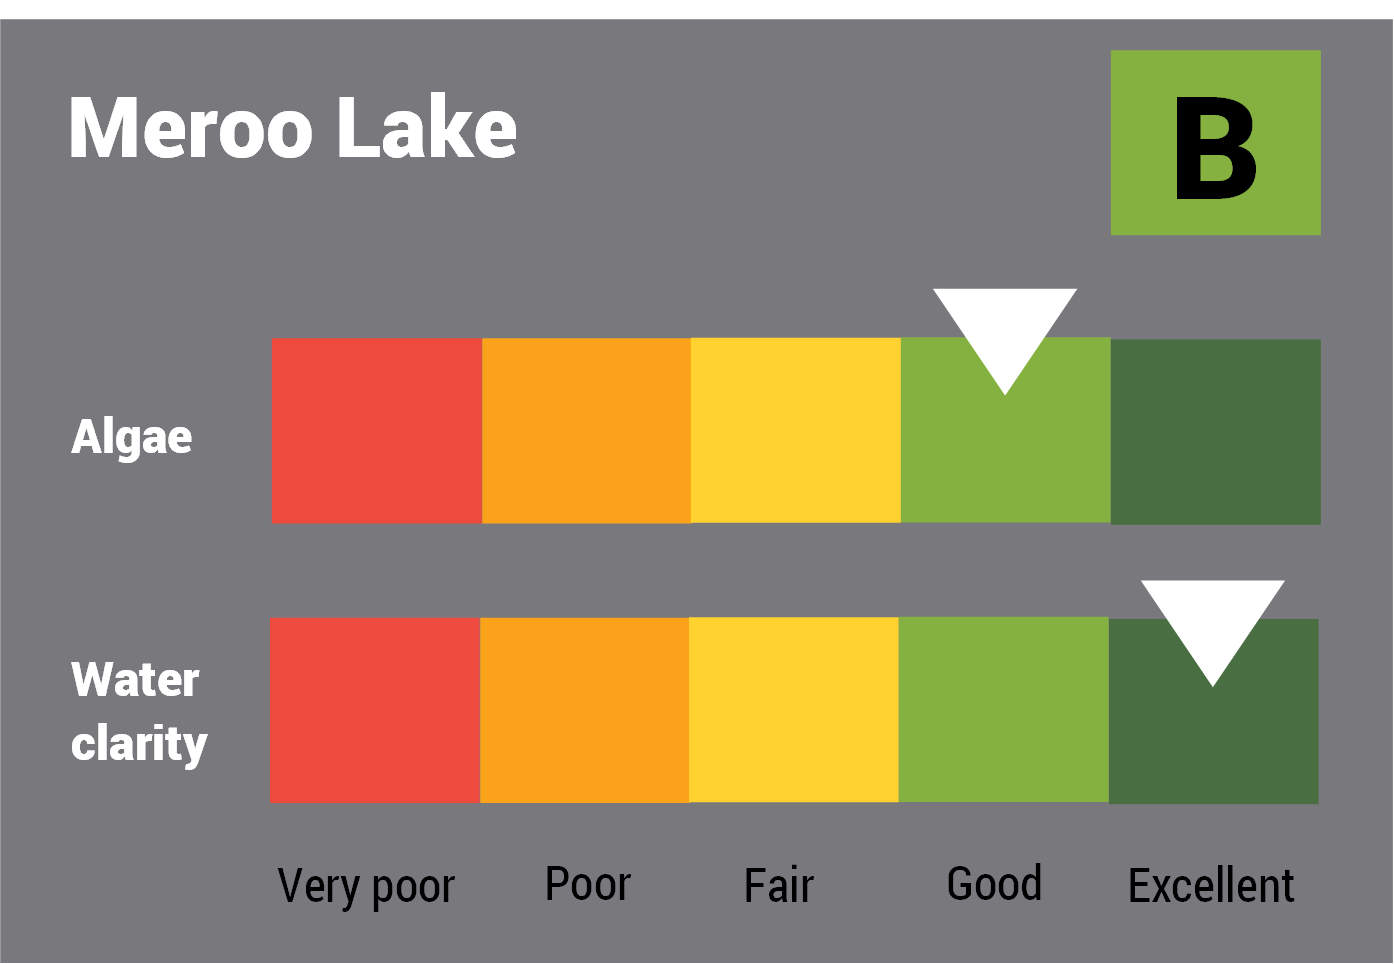 Meroo Lake water quality report card for algae and water clarity showing colour-coded ratings (red, orange, yellow, light green and dark green, which represent very poor, poor, fair, good and excellent, respectively). Algae is rated 'good' and water clarity is rated 'excellent' giving an overall rating of 'excellent' or 'A'.